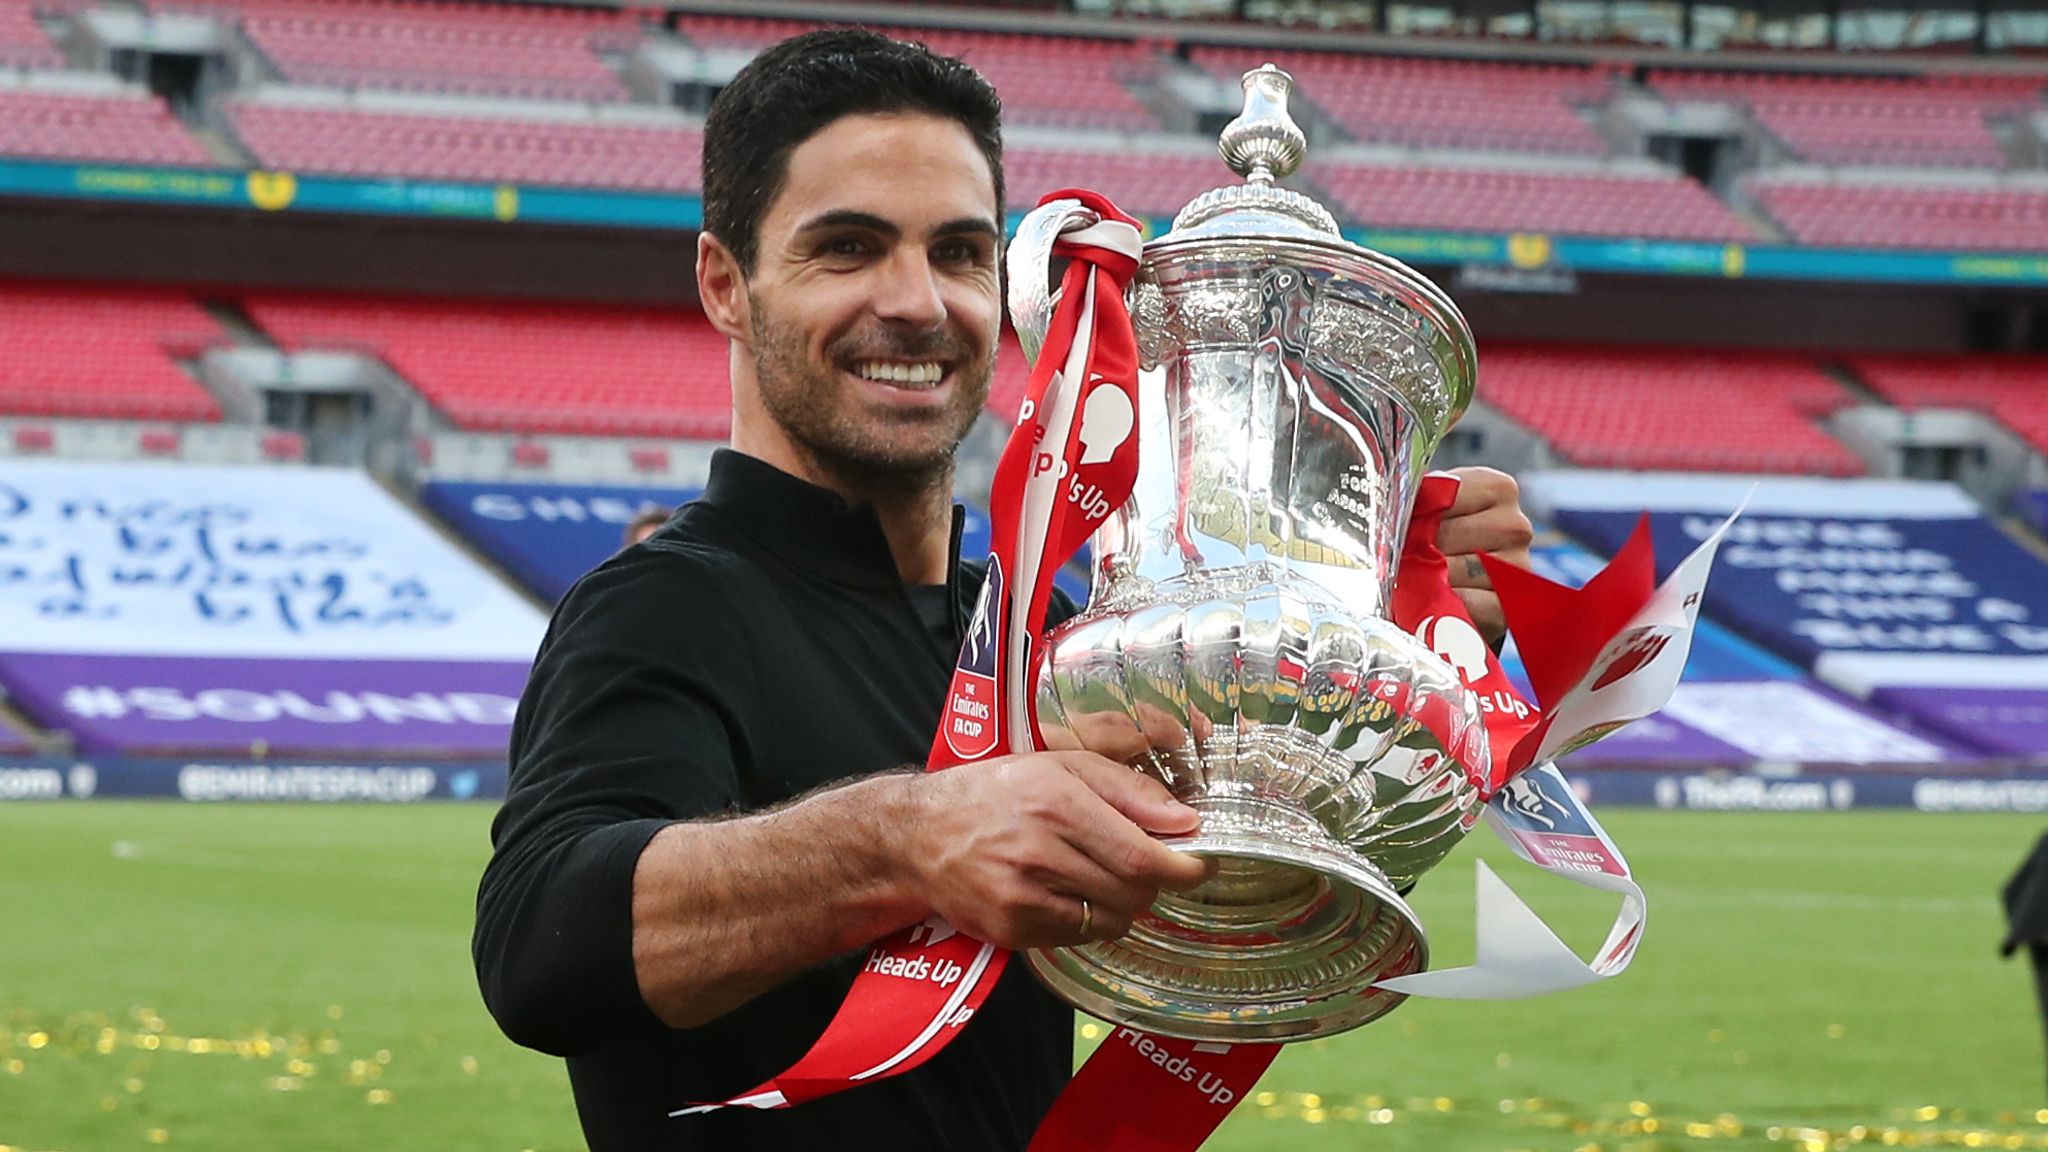 Arsenal's FA Cup win over Chelsea highlights Mikel Arteta's impact | Football News | Sky Sports